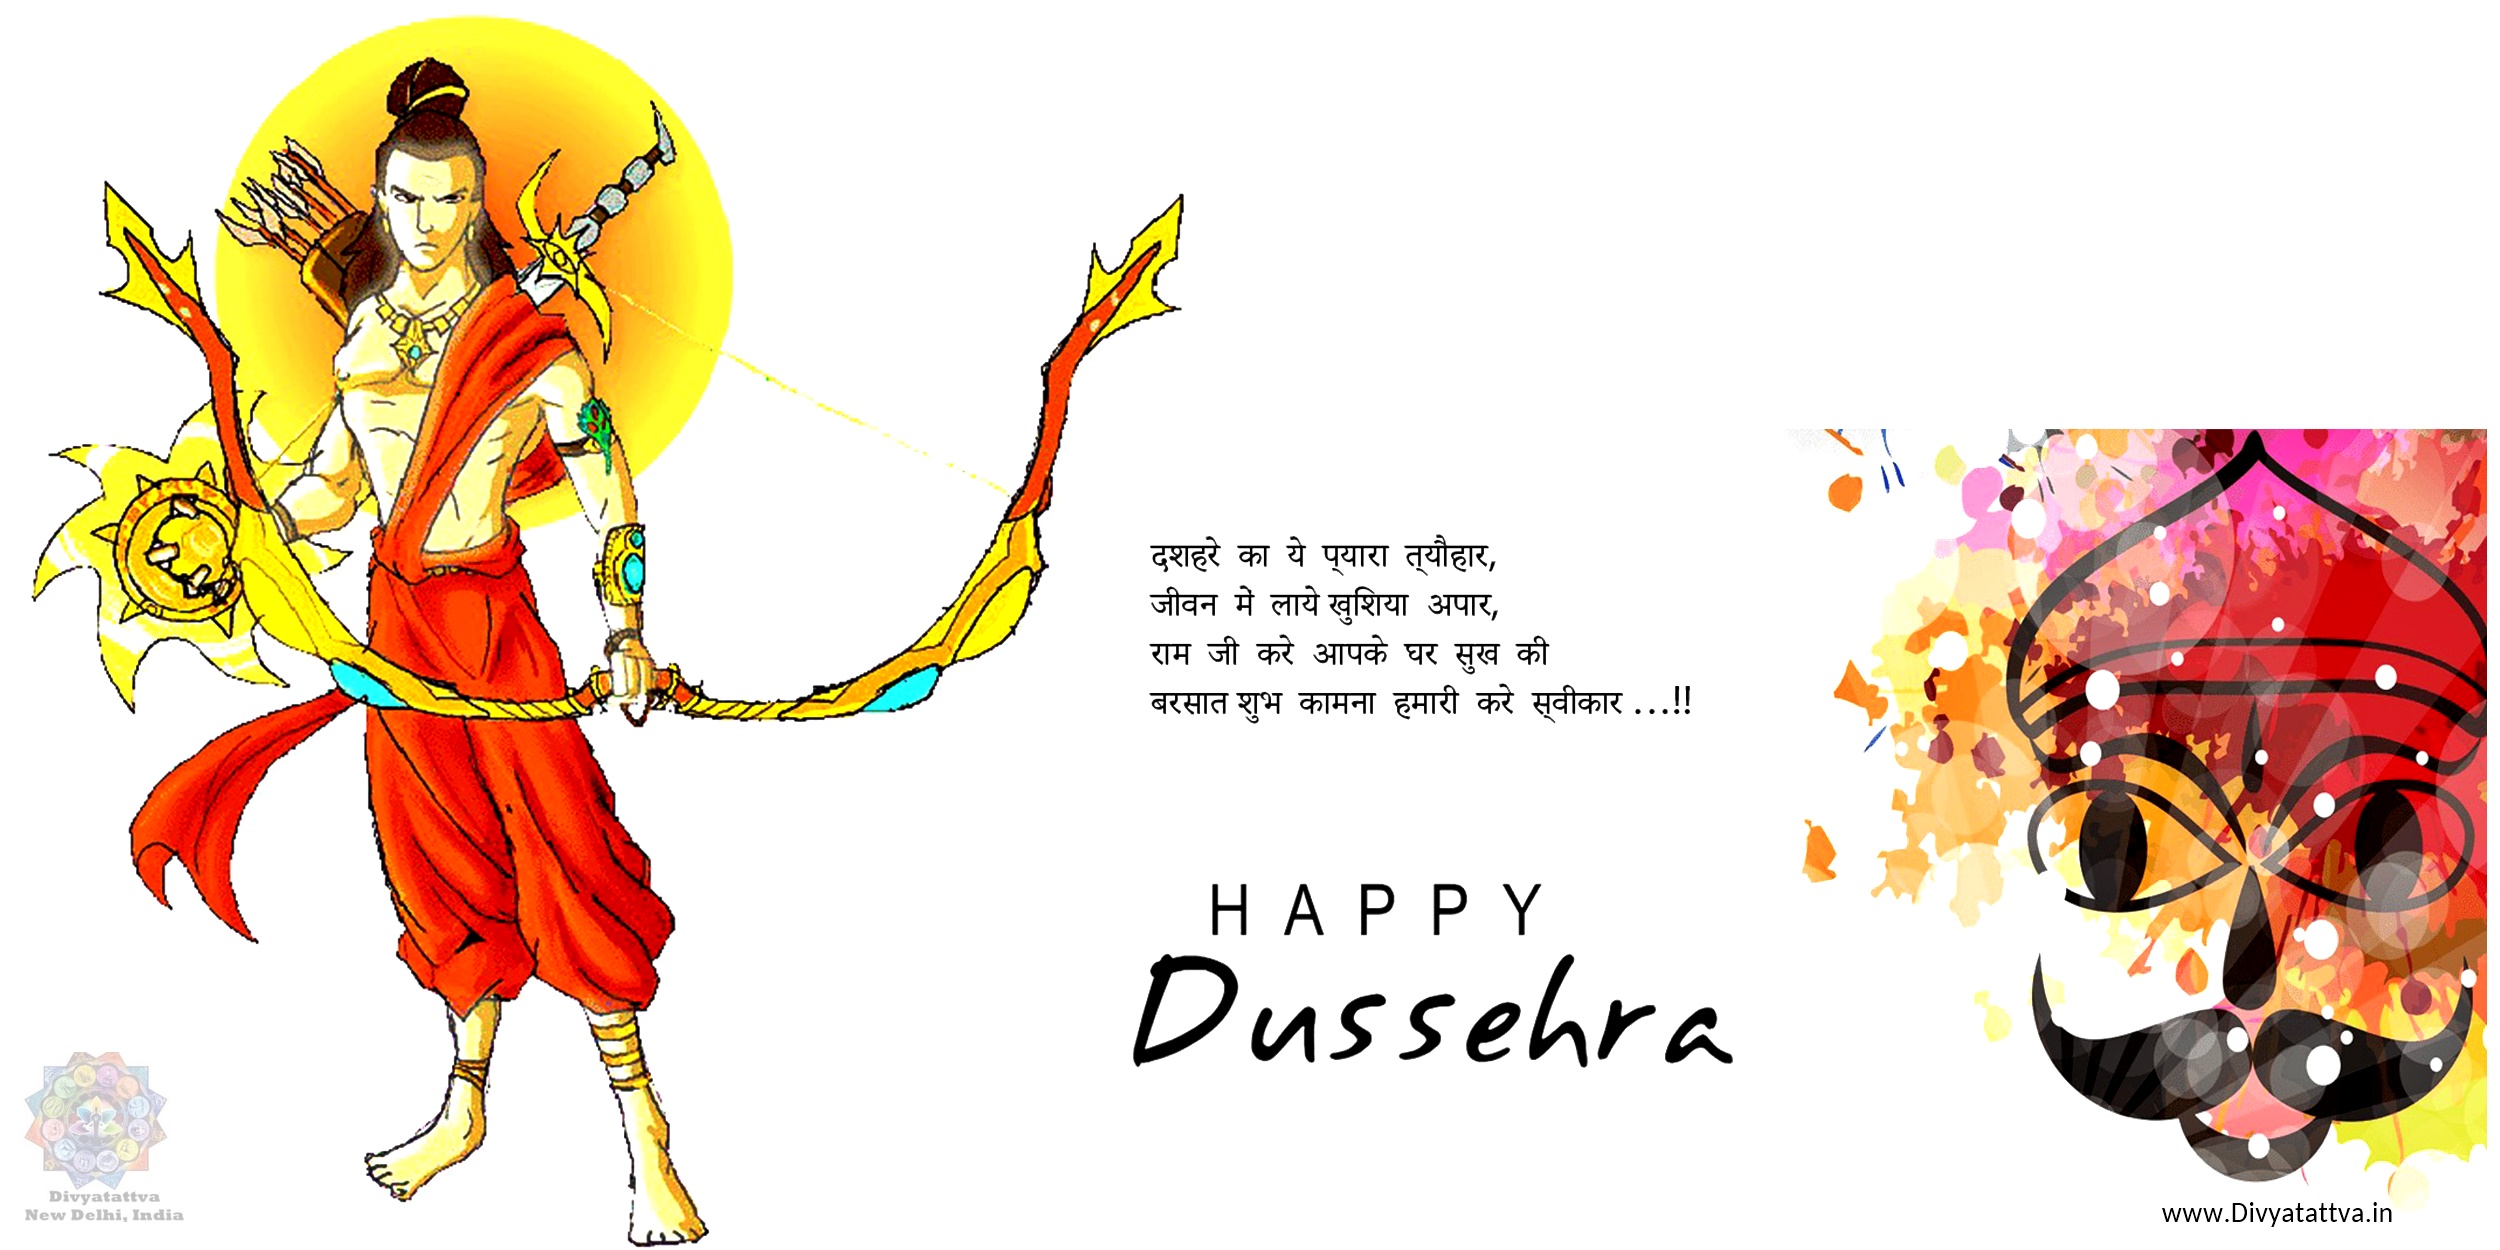 Dussehra Background Images HD Pictures and Wallpaper For Free Download   Pngtree